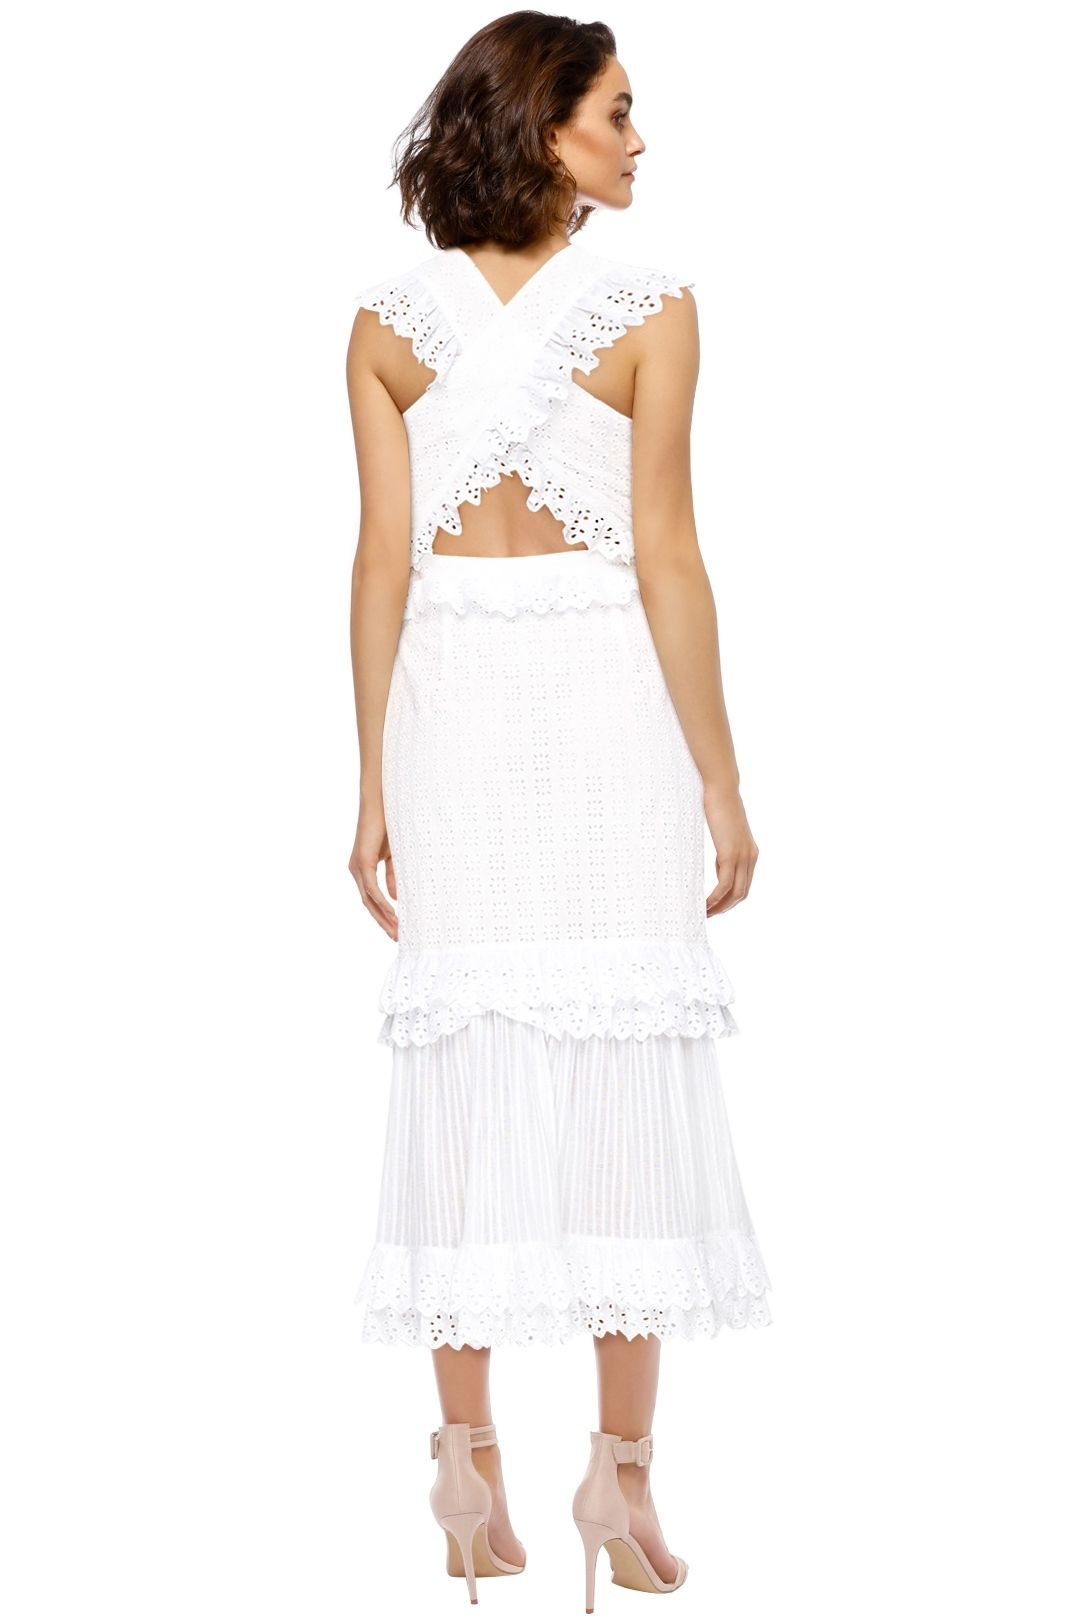 Alice McCall - Everything She Wants Dress - Porcelain White - Back